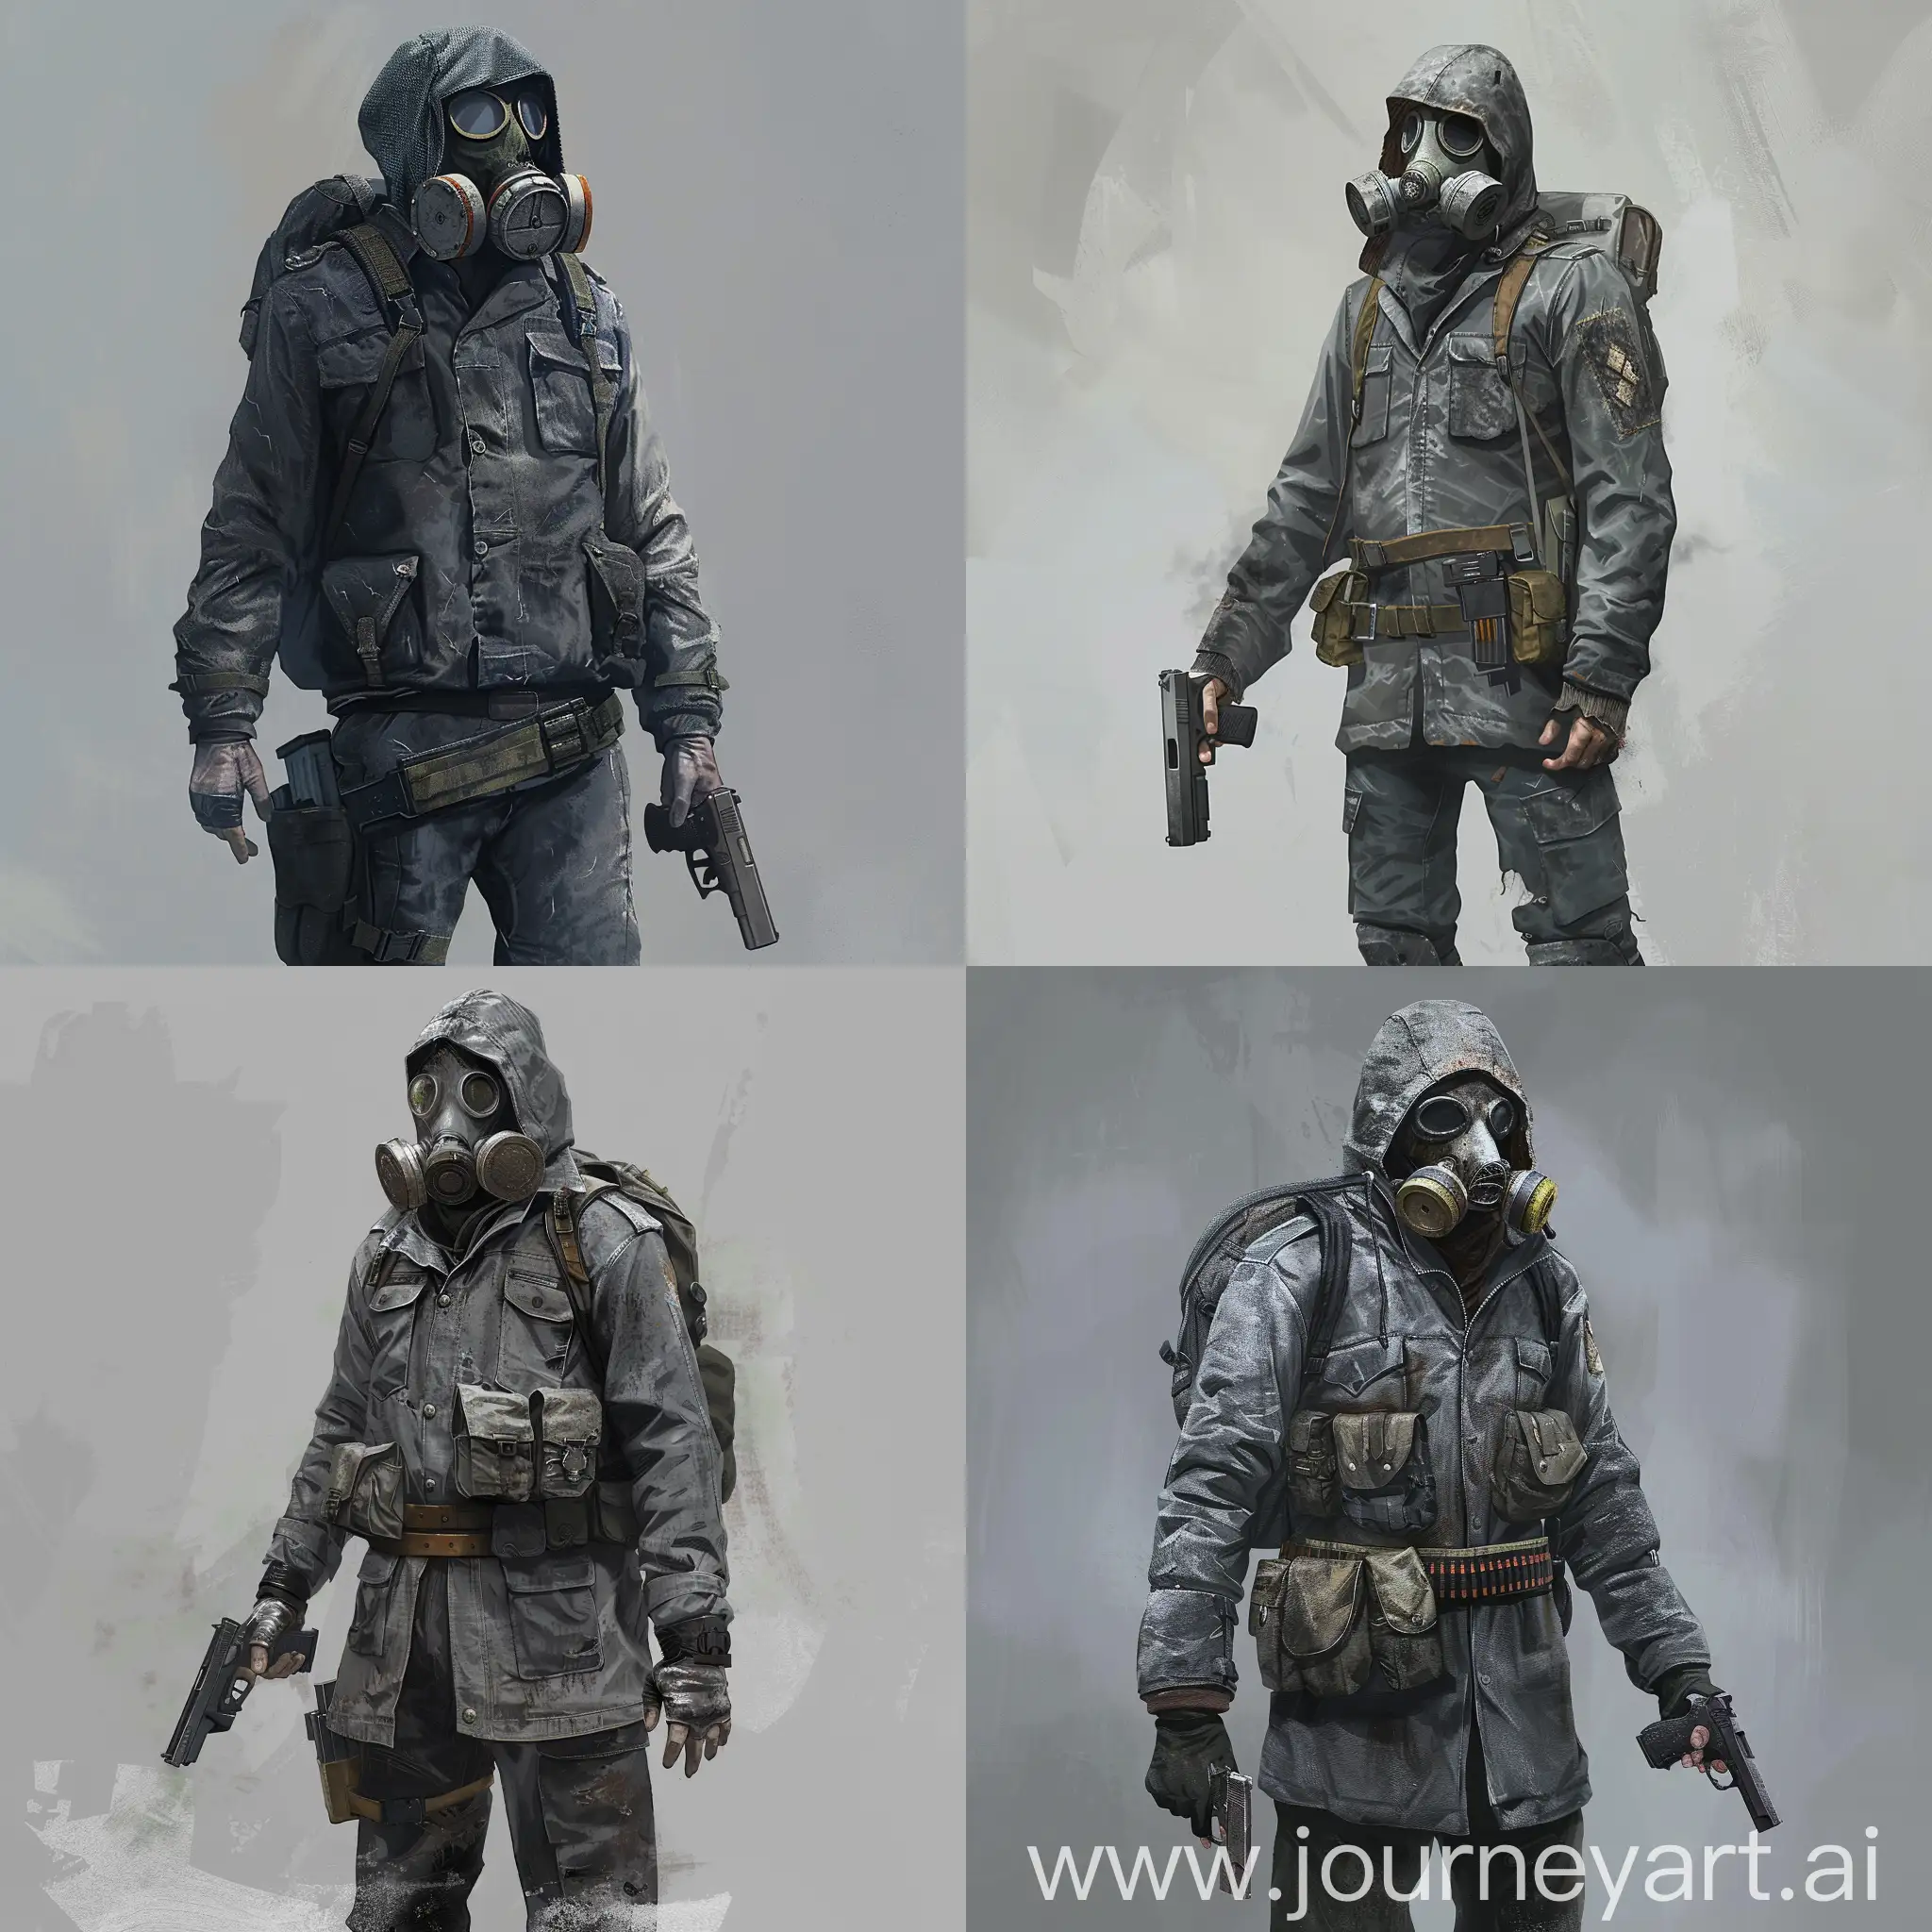 Mysterious-Stalker-with-Gas-Mask-and-Pistol-Concept-Art